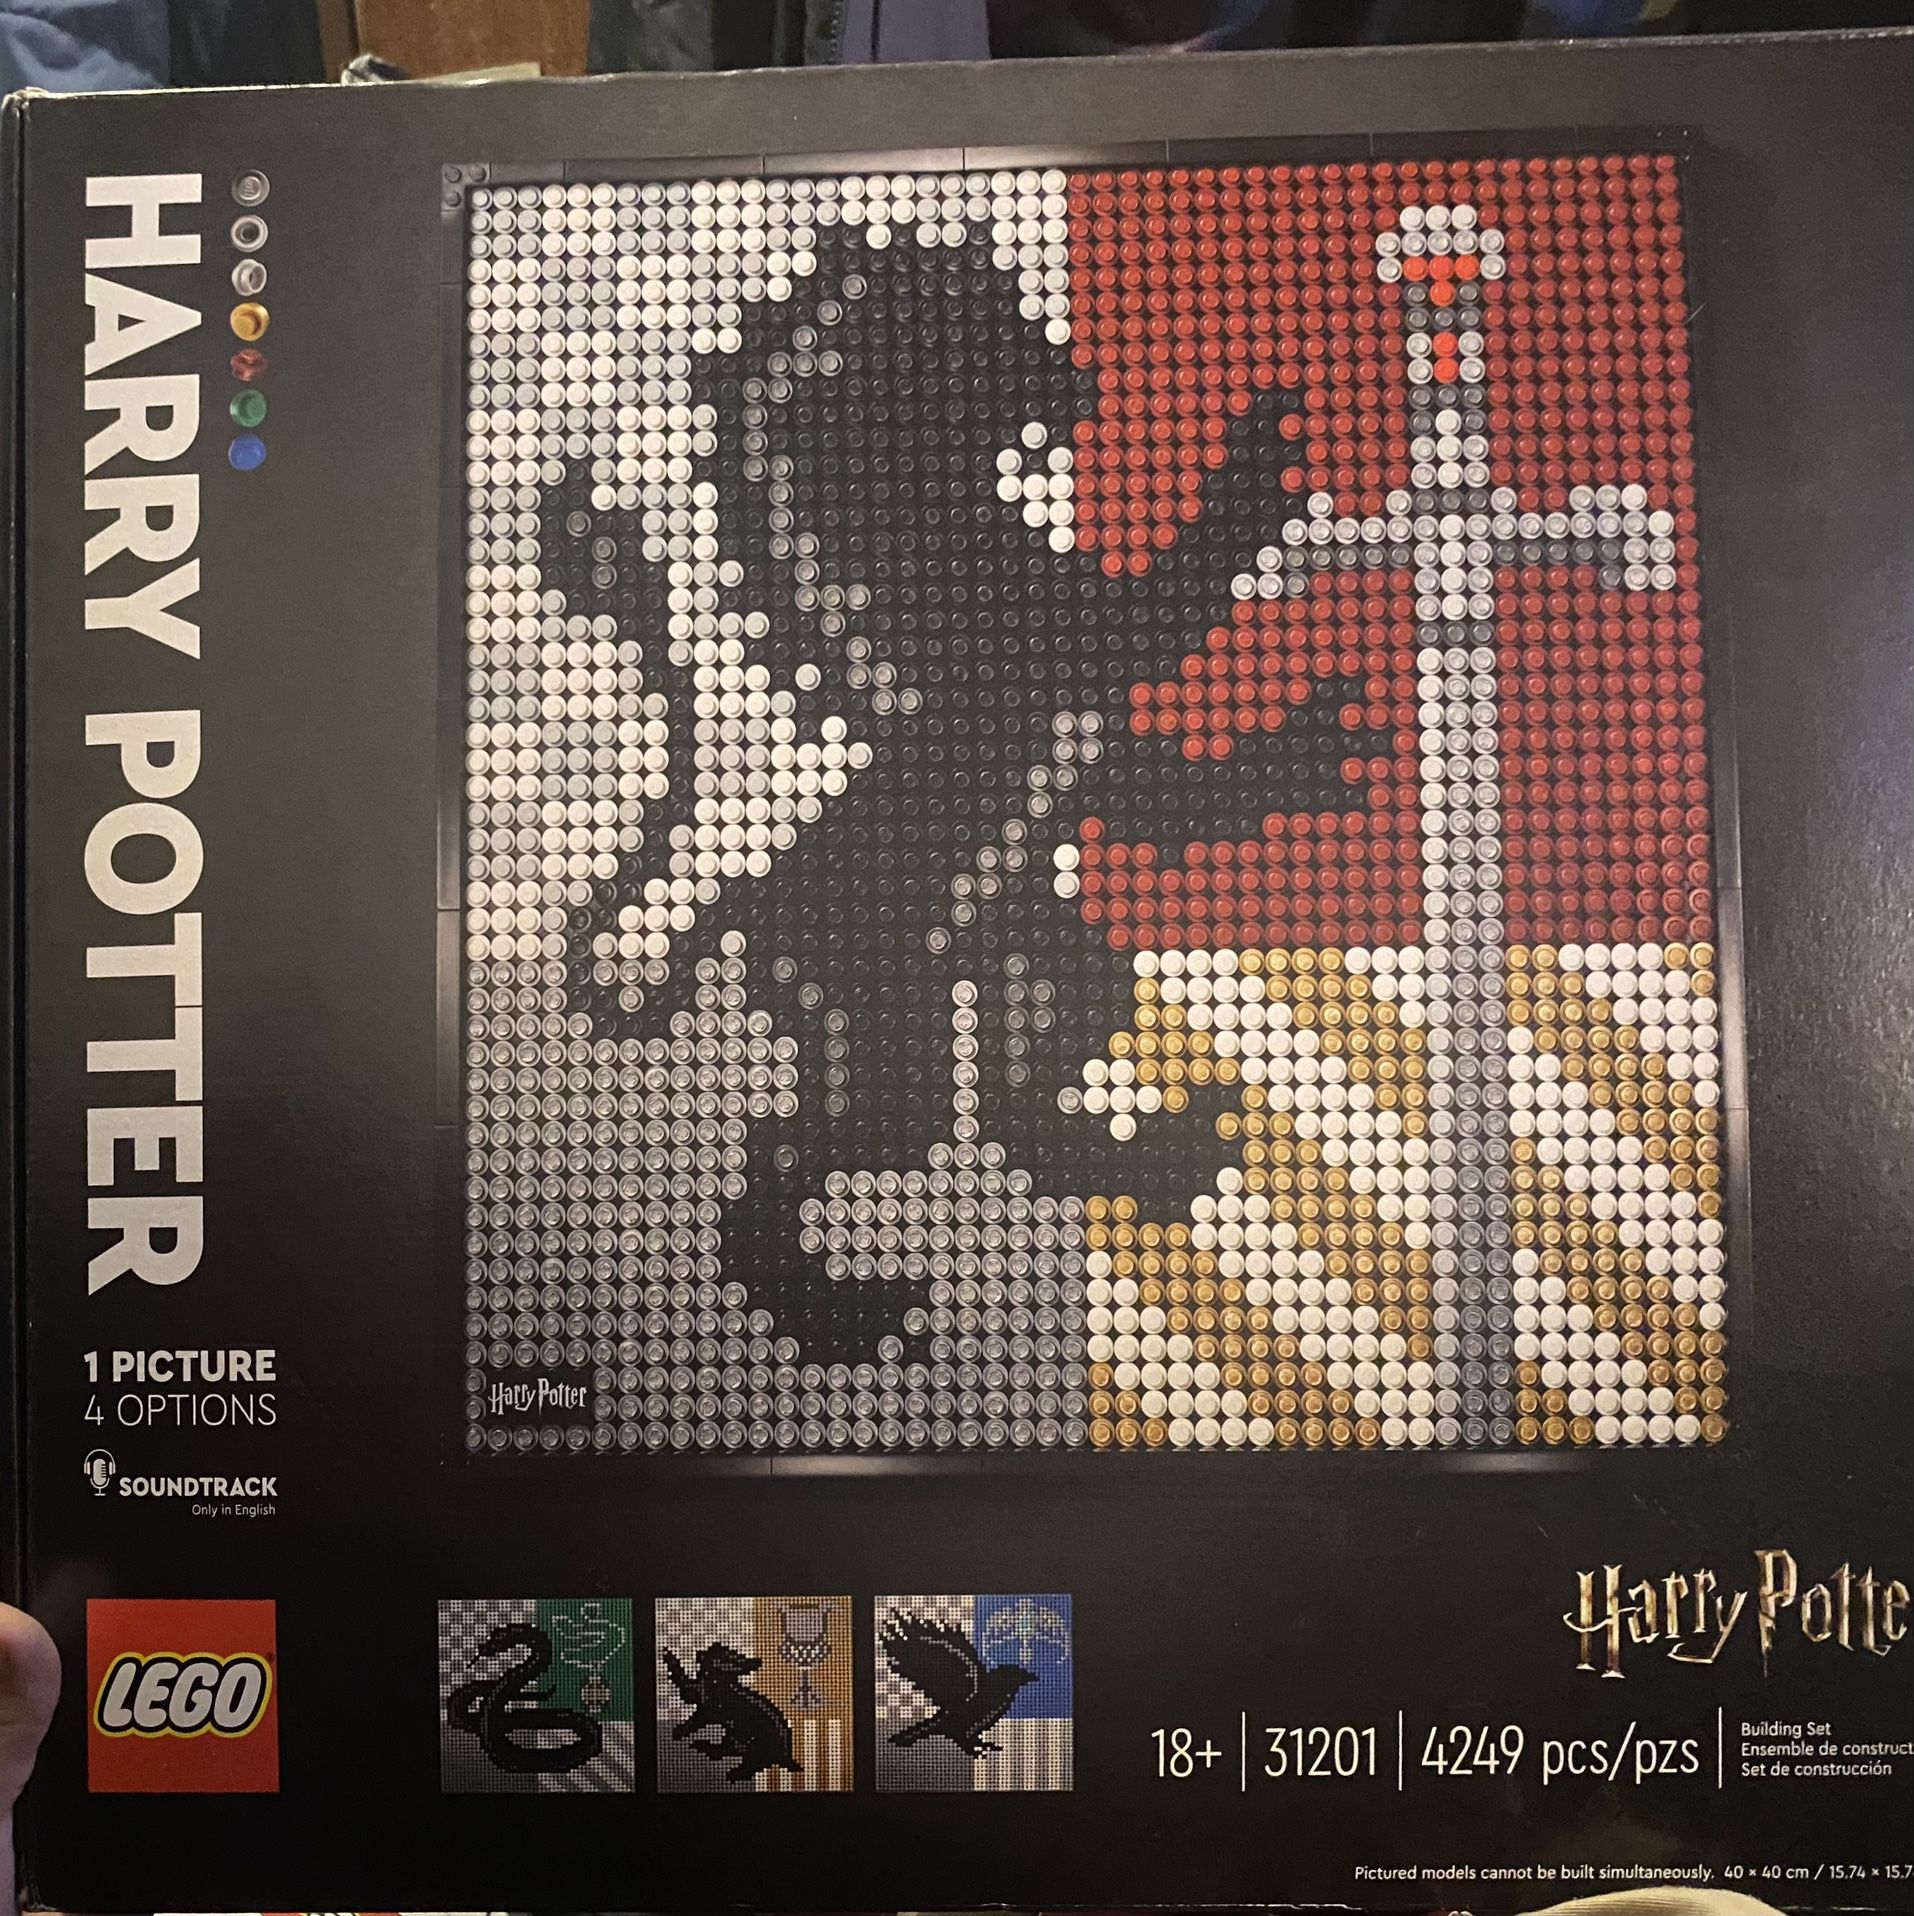 NWB LEGO Harry Potter (1 Picture 4 Options)